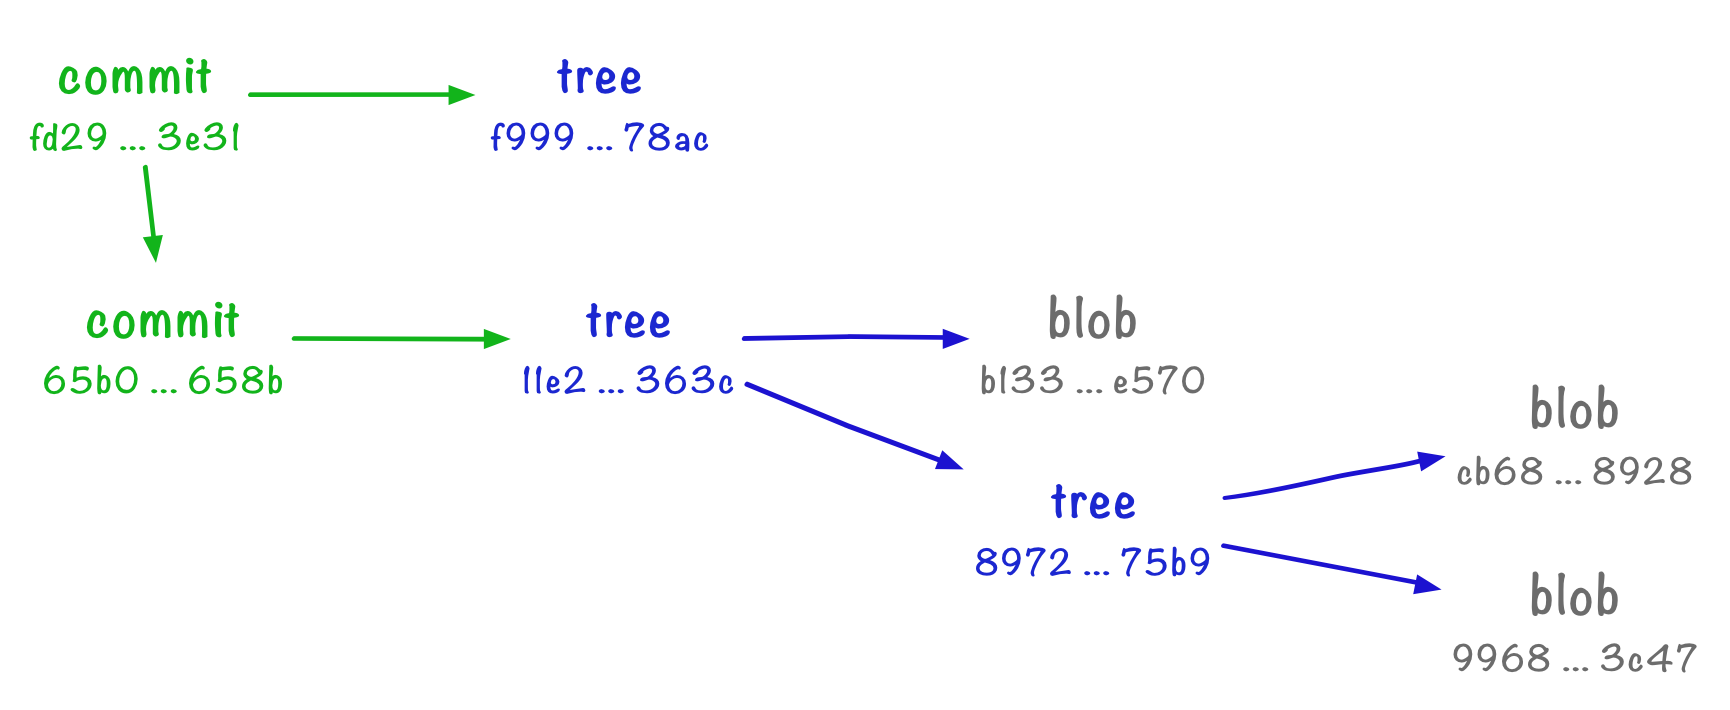 A commit object (green), pointing to trees (blue) and another commit, then some blobs (grey).